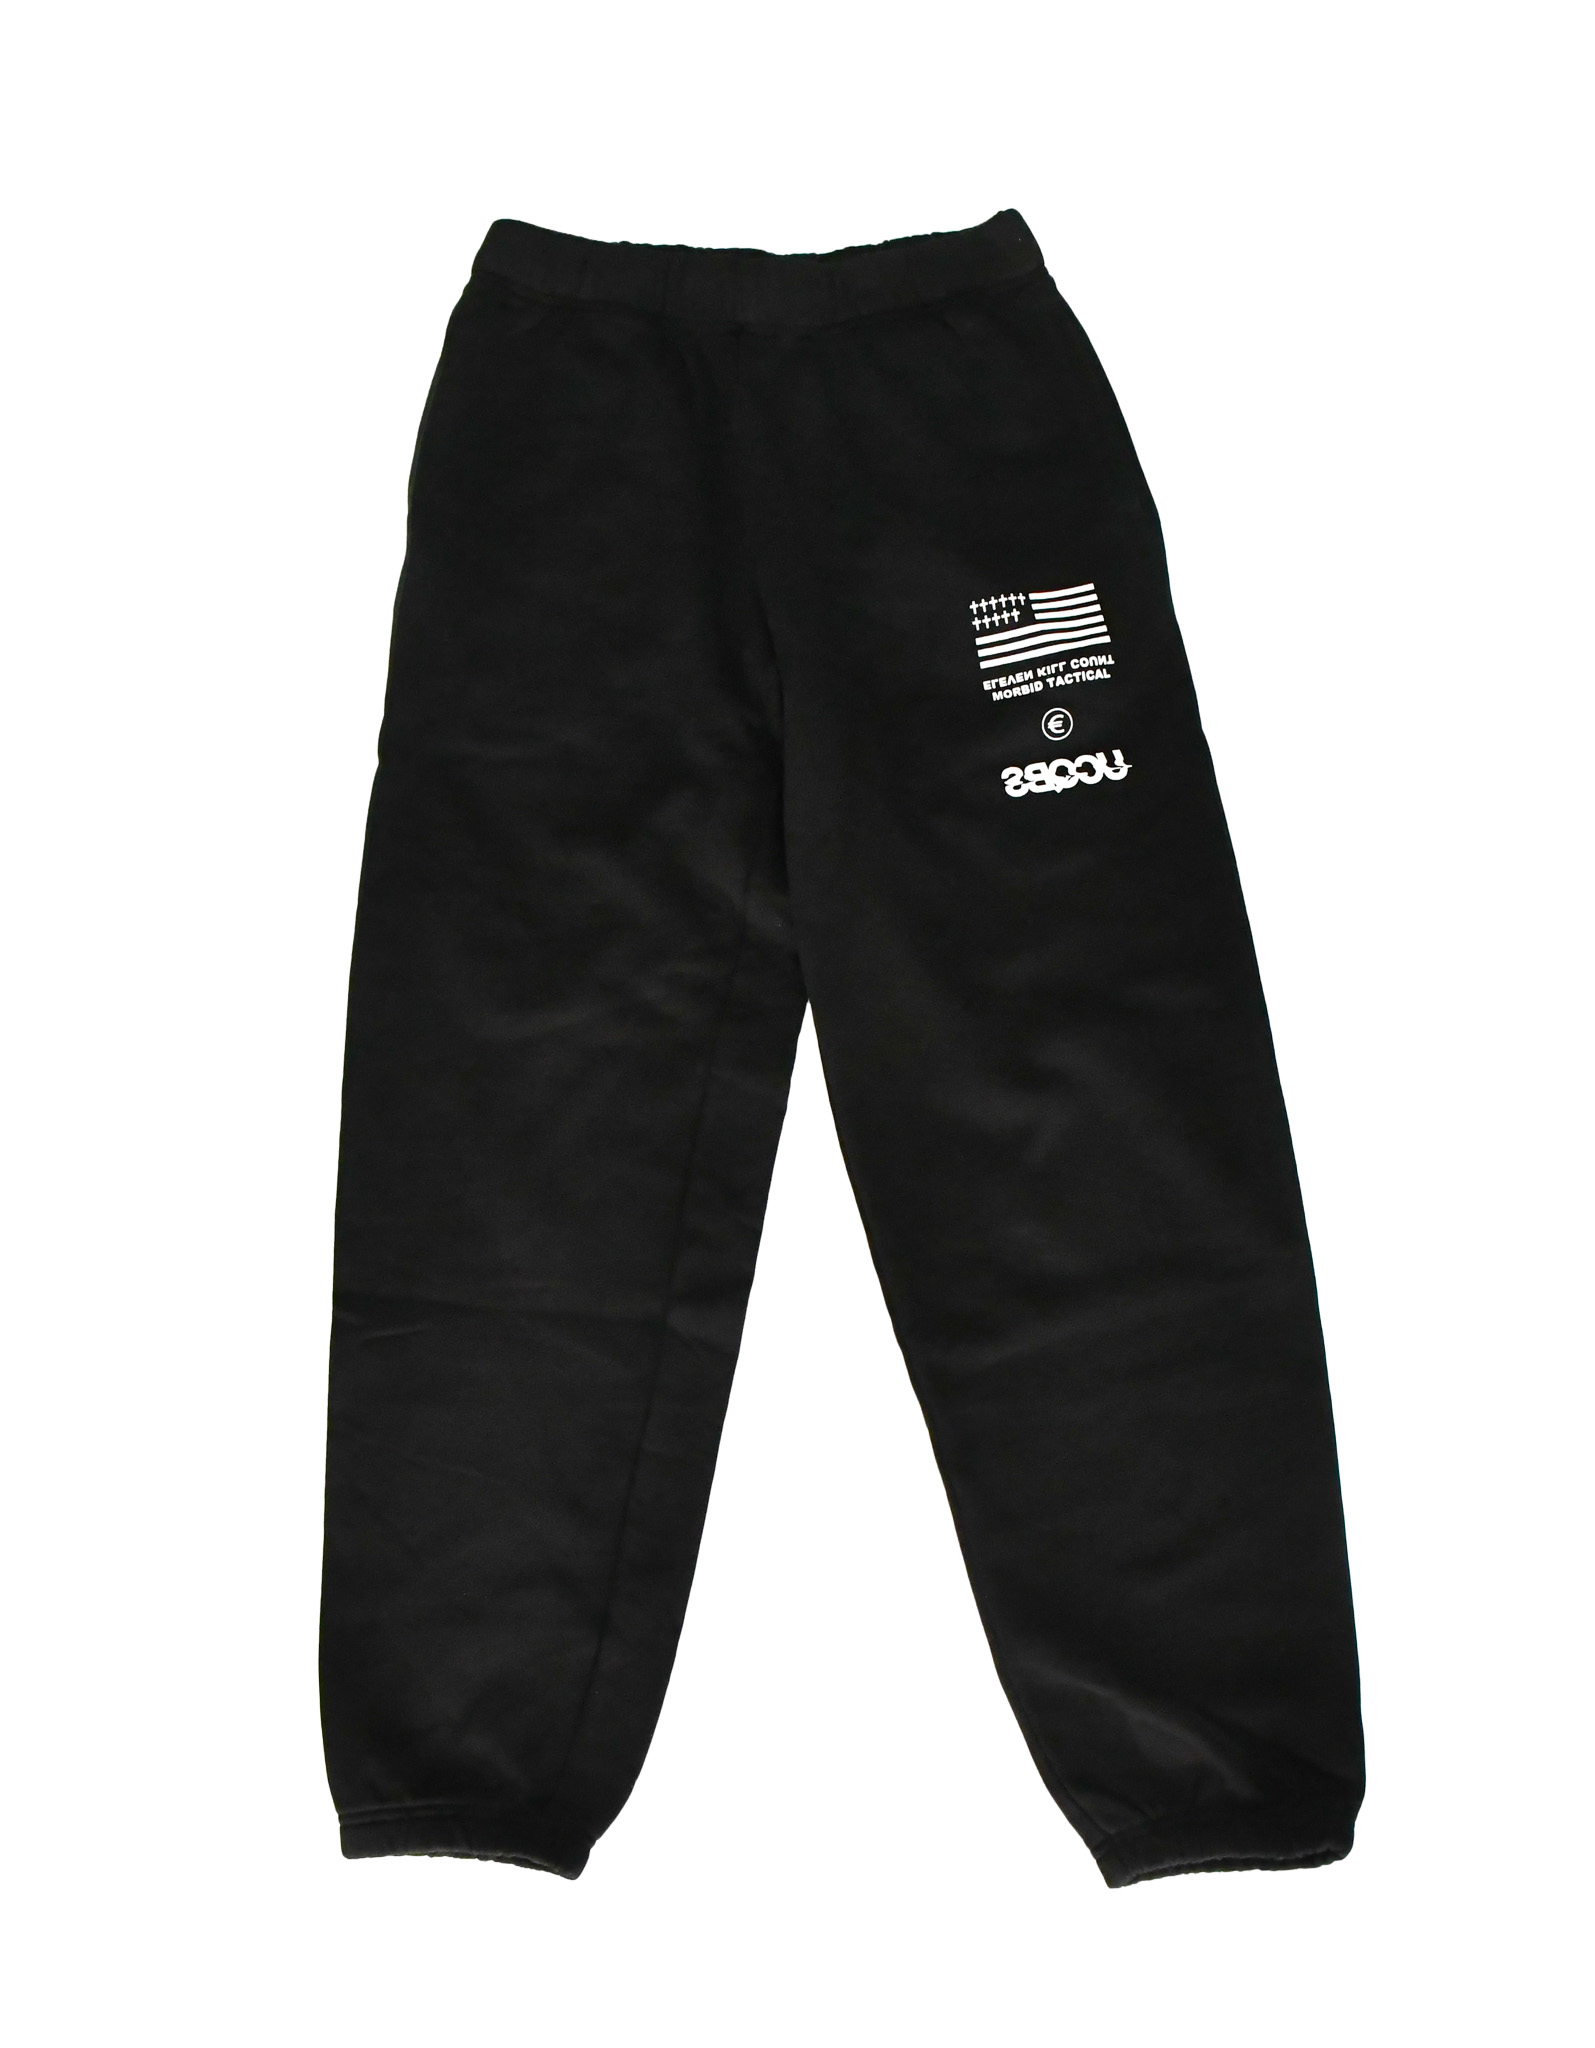 UCQBS-2022WS #37 Sweat Pants